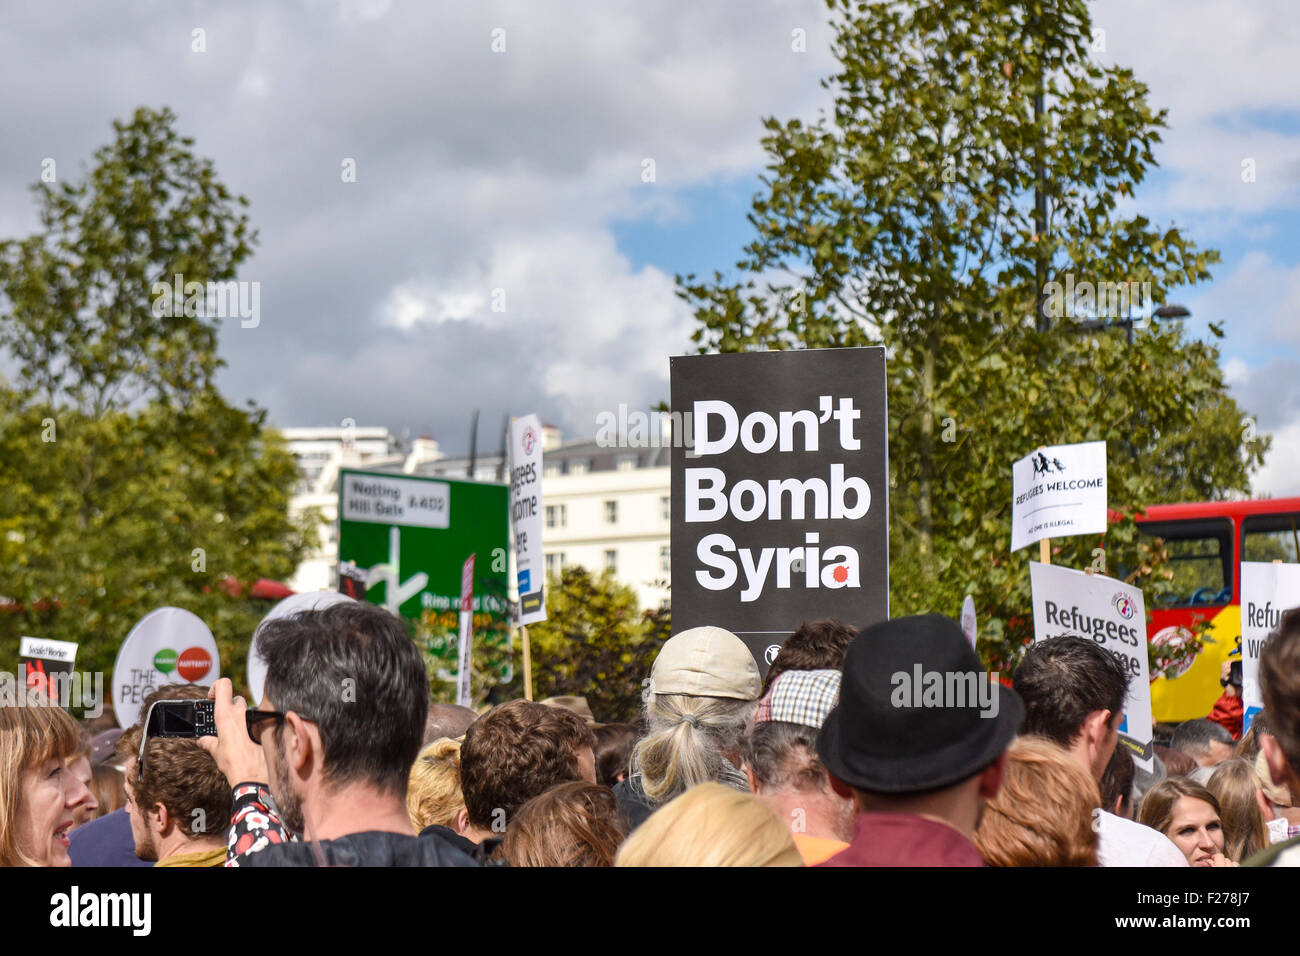 A demonstration in support of refugees and migrants in London. Stock Photo